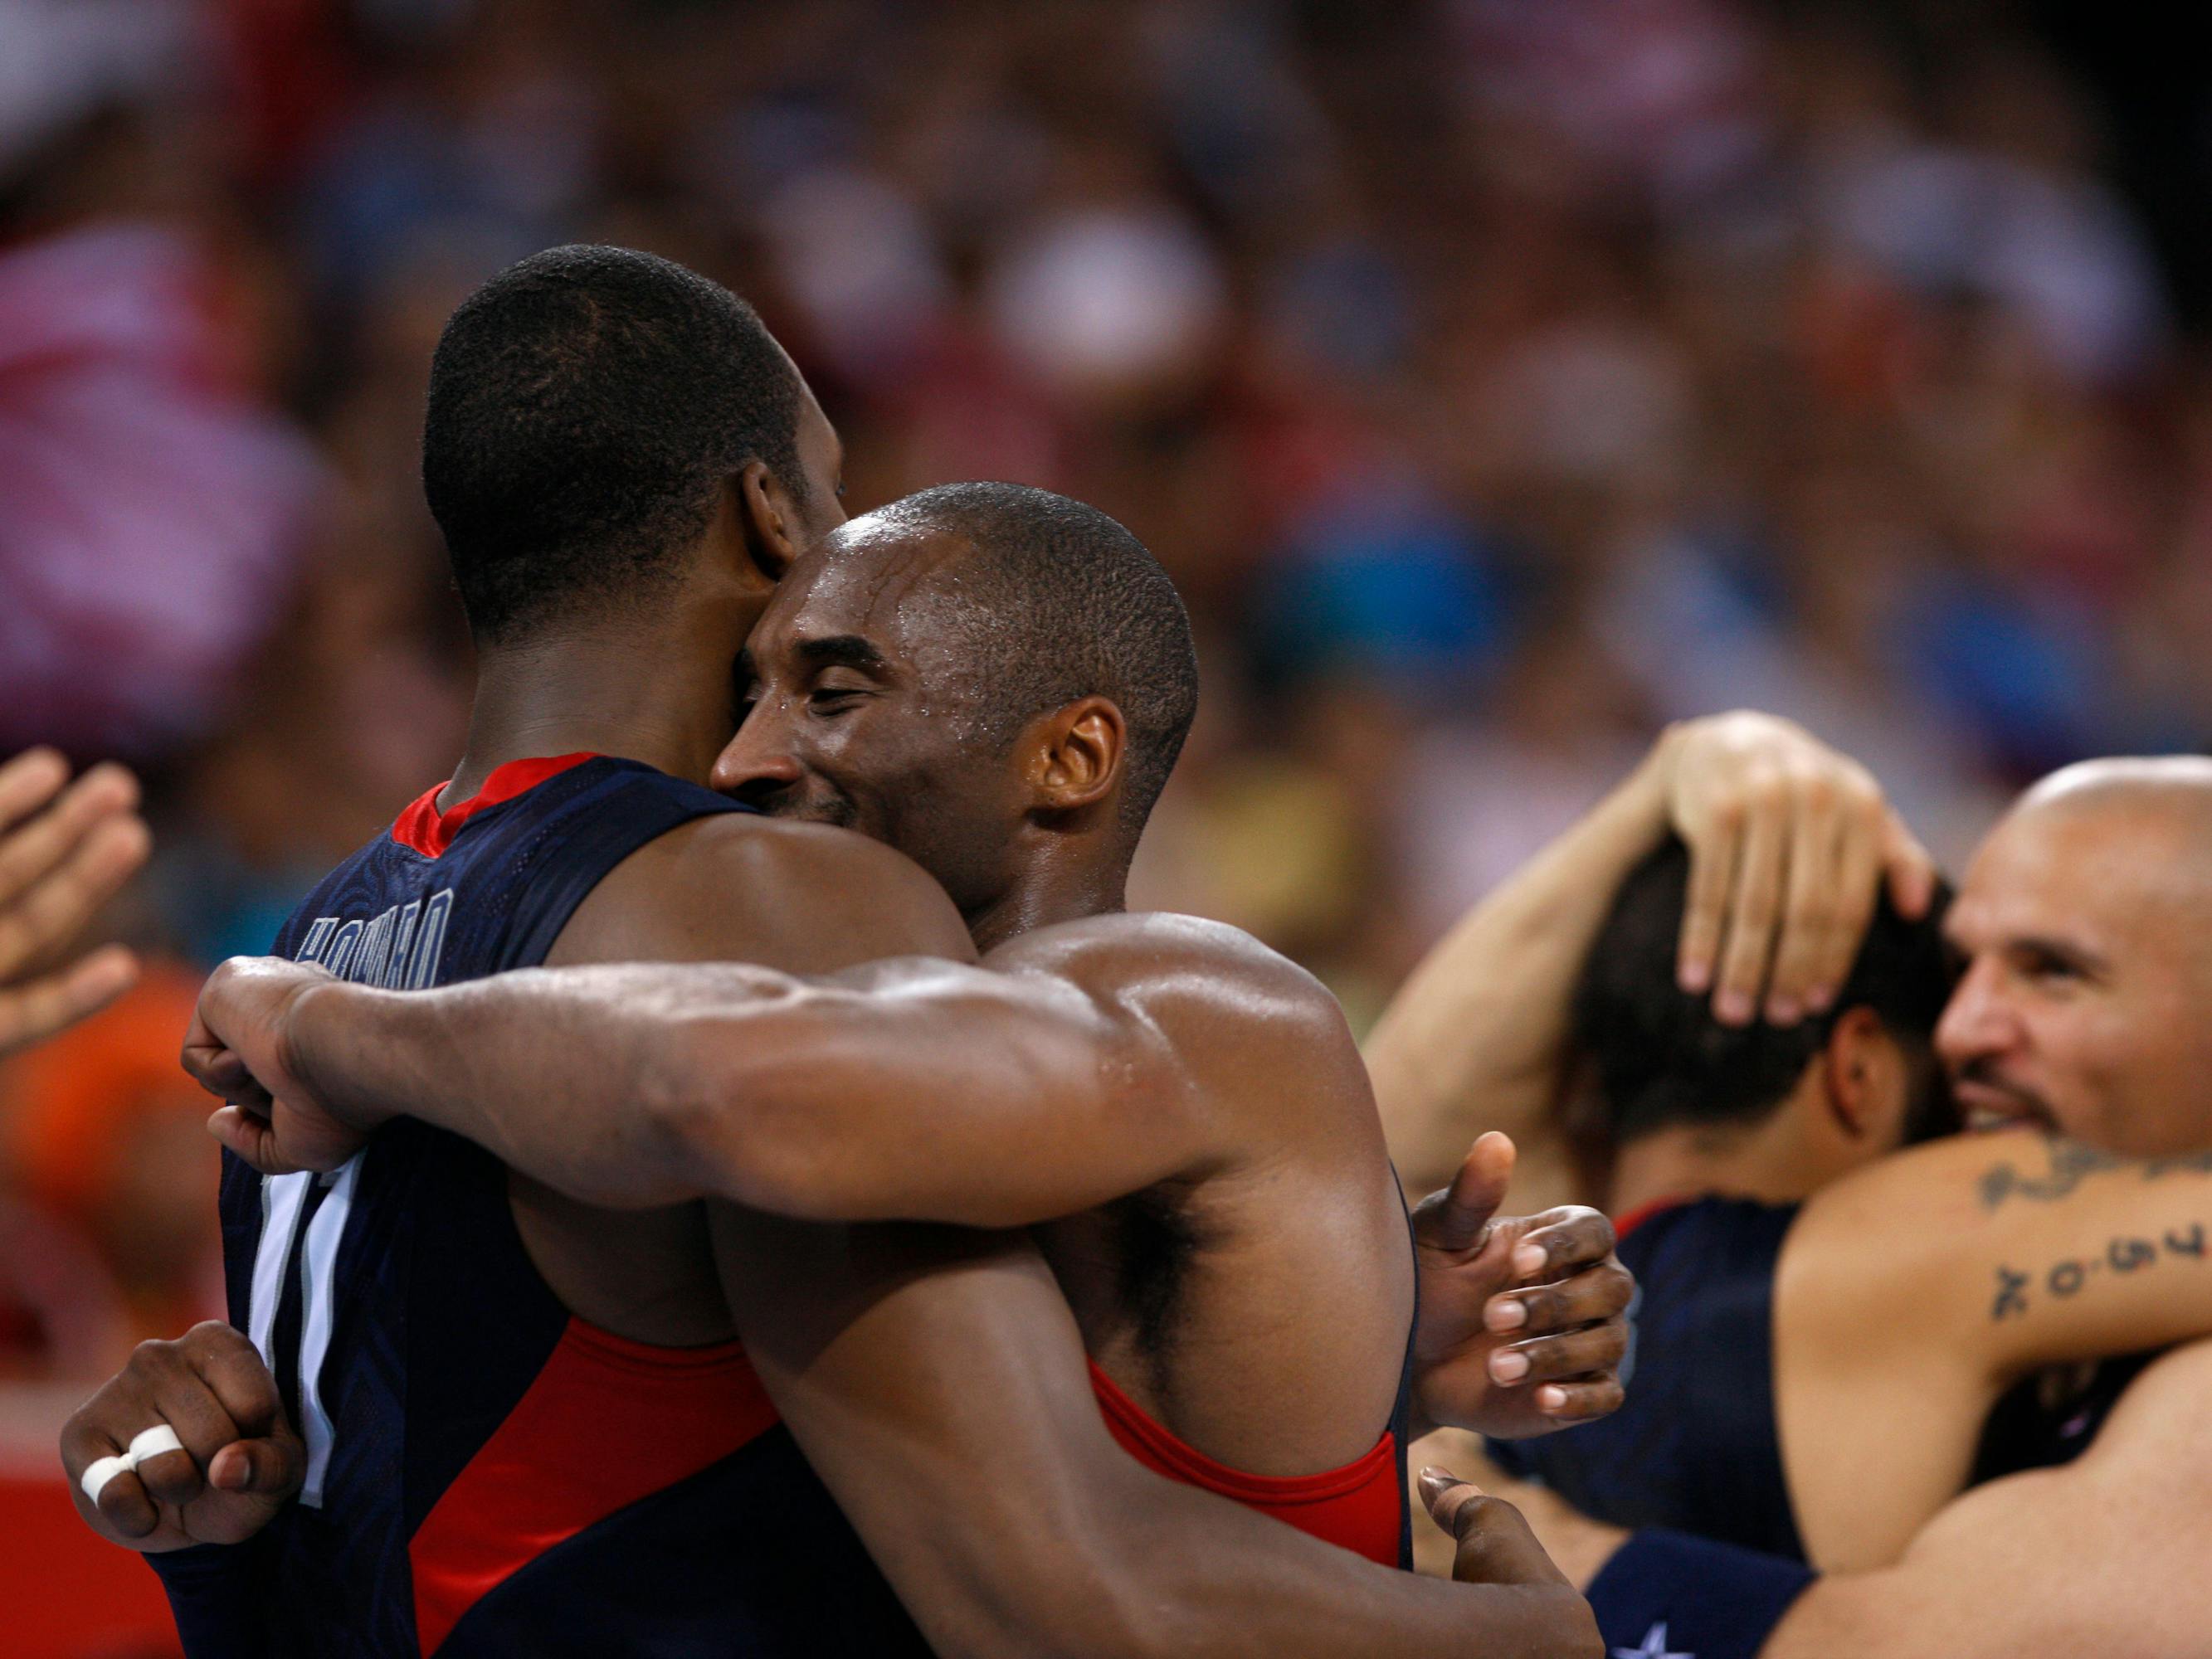 Dwight Howard and Kobe Bryant hug, and Jason Kidd hugs someone else in the background.